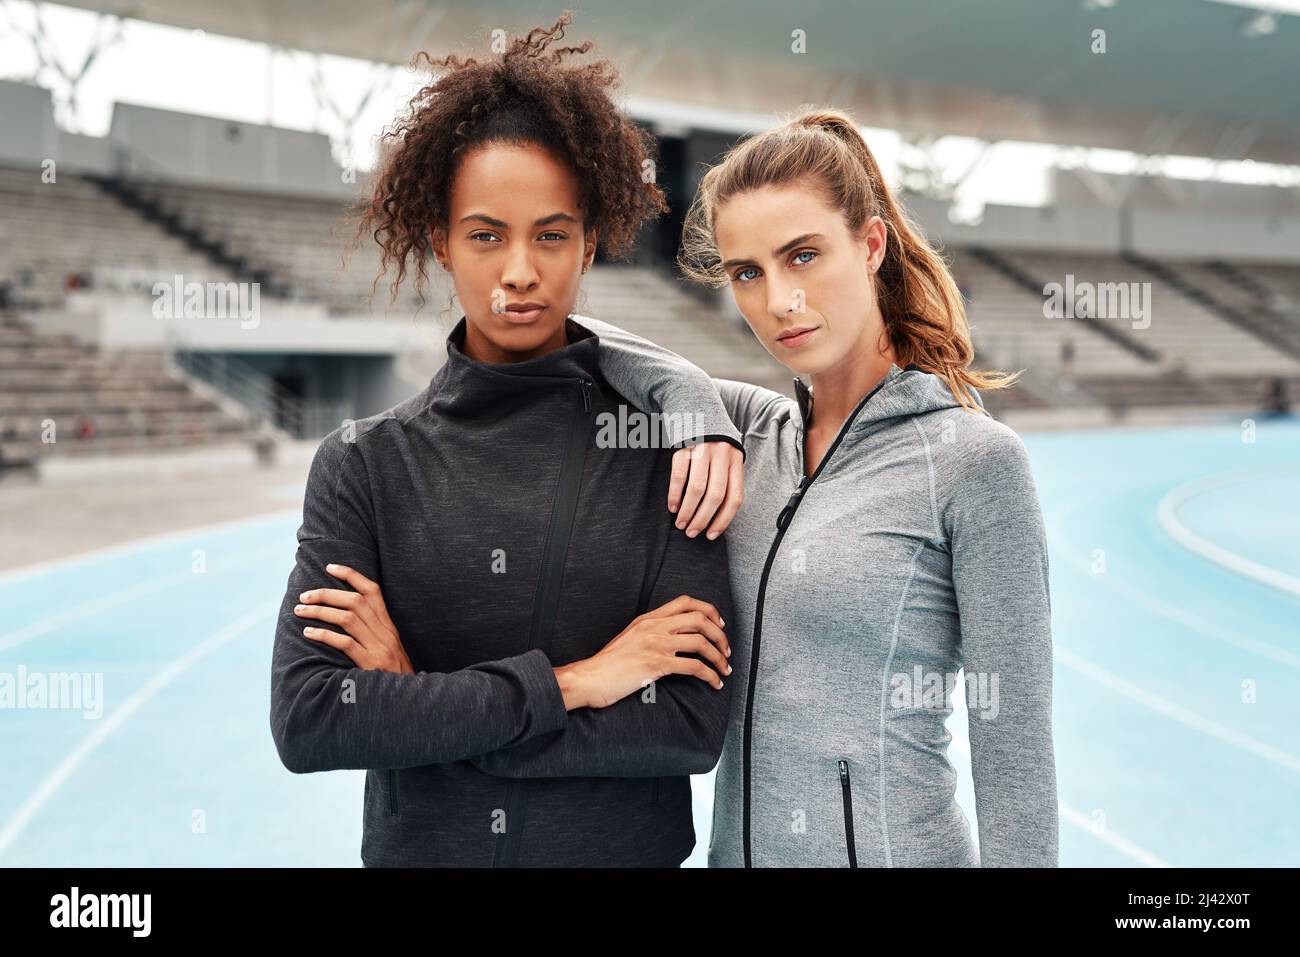 We dare you to try stop us. Cropped portrait of two attractive young athletes standing together after a run on a track field during a training session Stock Photo